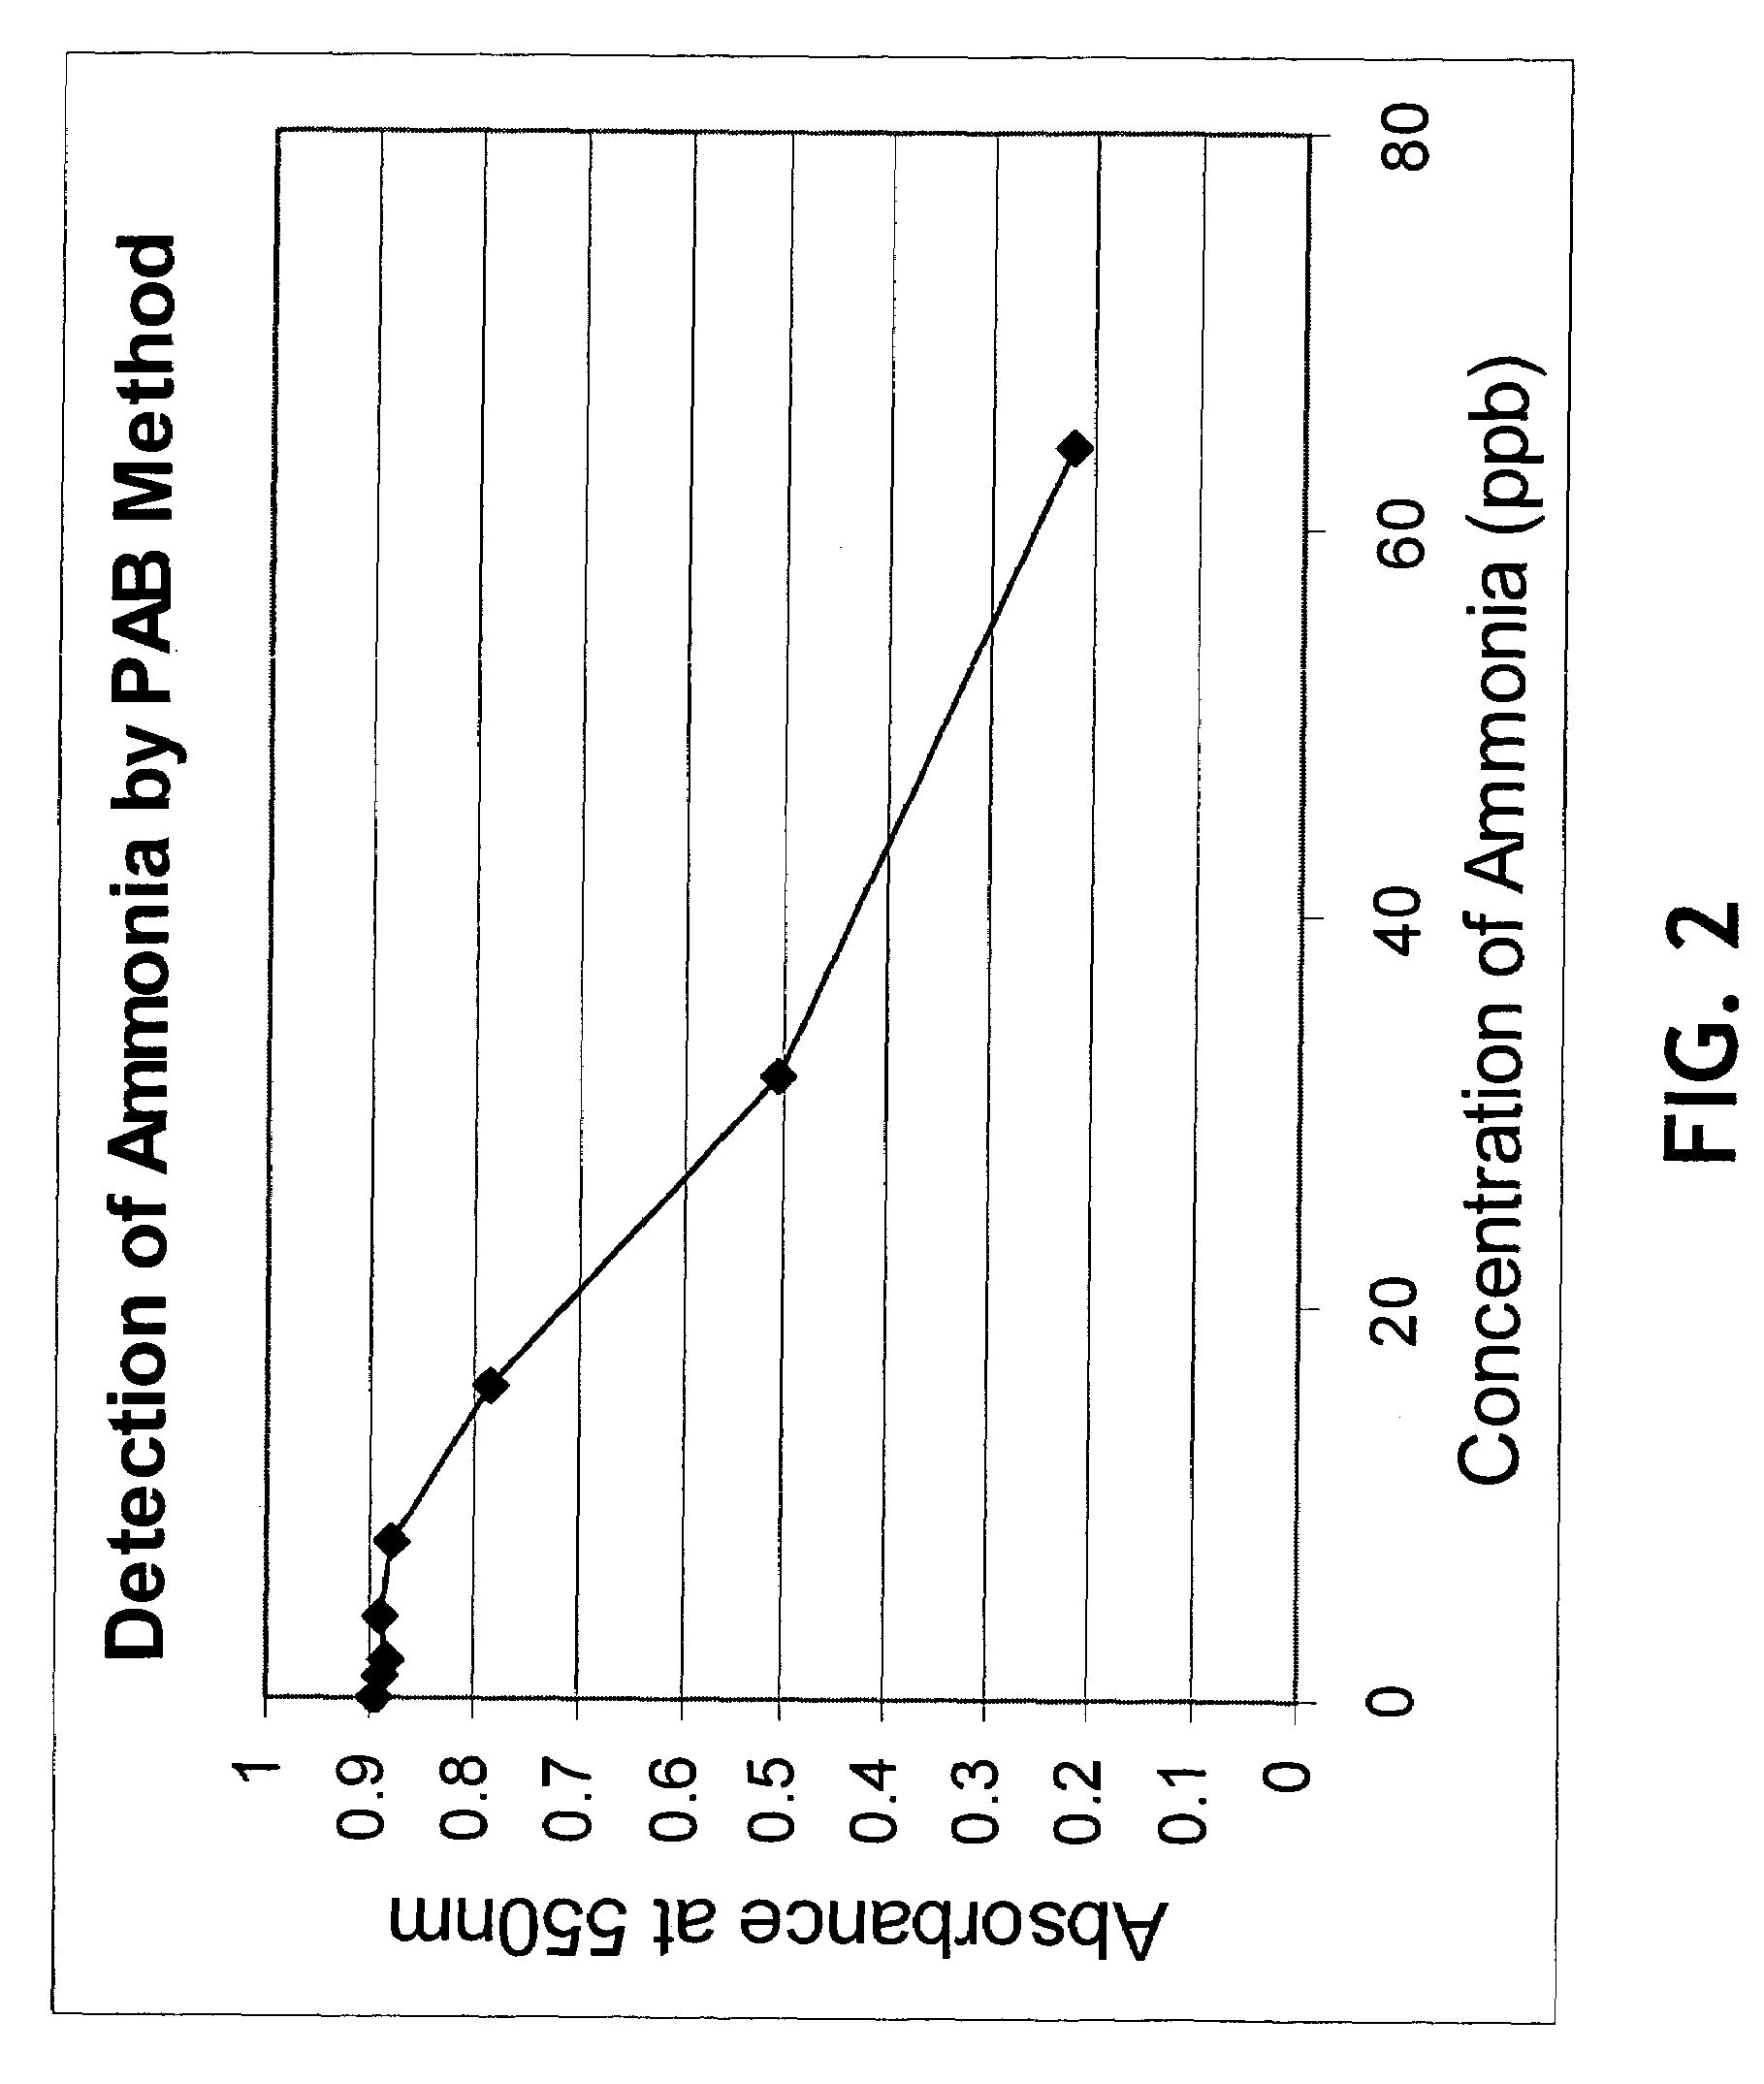 Method and device for detecting ammonia odors and helicobacter pylori urease infection